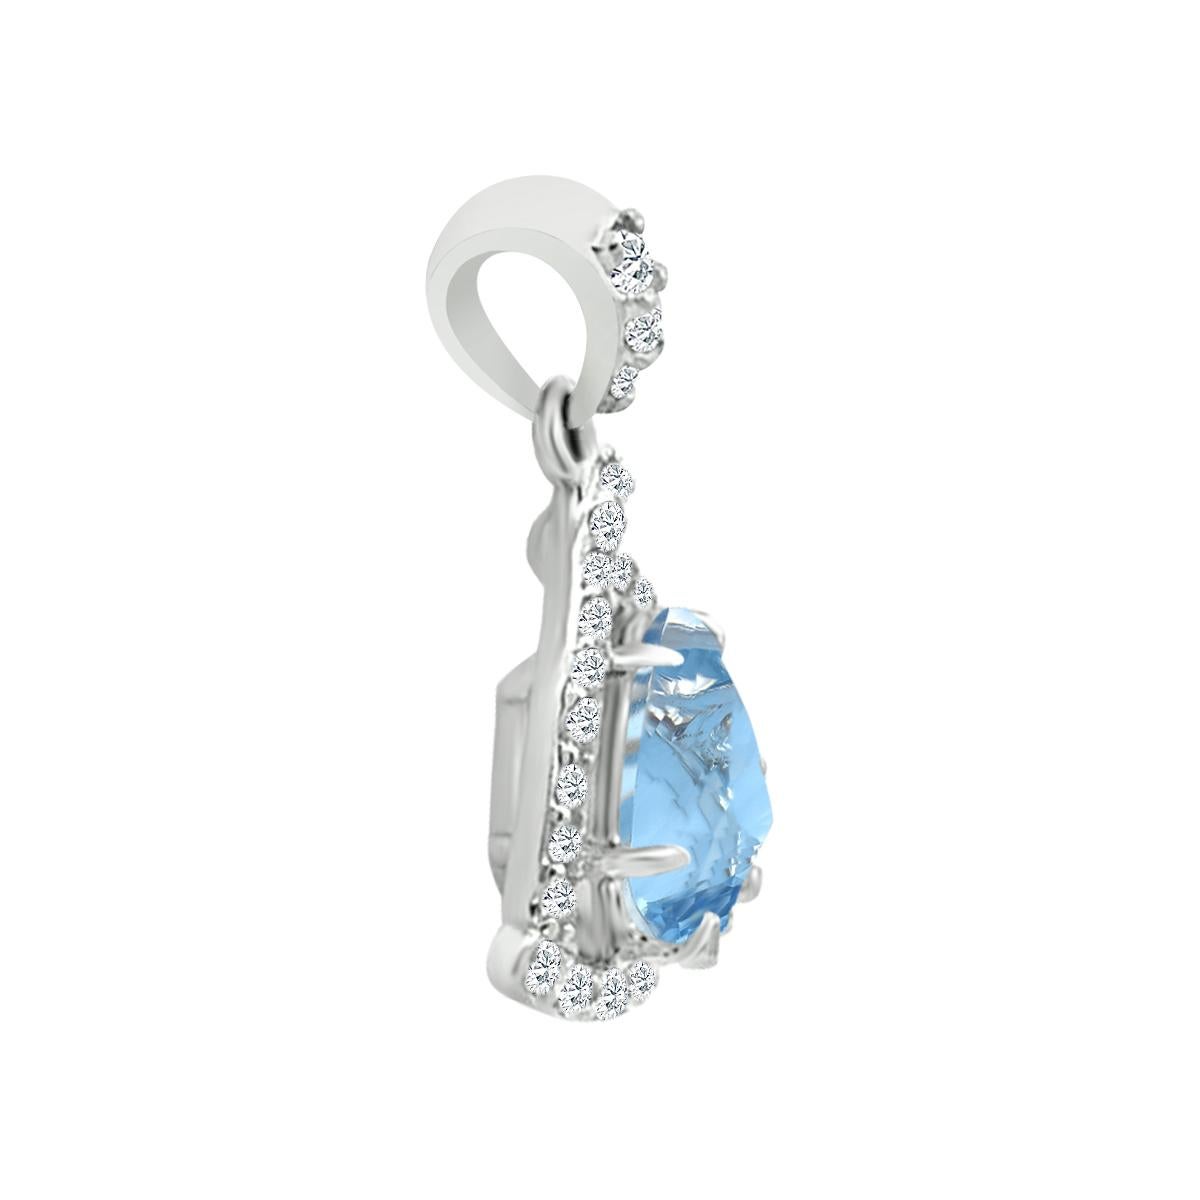 A Classic Elegant And Timeless Styling Make This Pendant The Perfect Gift To Your Self Or Someone You Love.
This Classy Women's Pendant Proudly Displays One Sparkling Trillion Cut 8mm Prong Set Aquamarine Gemstone With Brilliant Pave Set Diamond